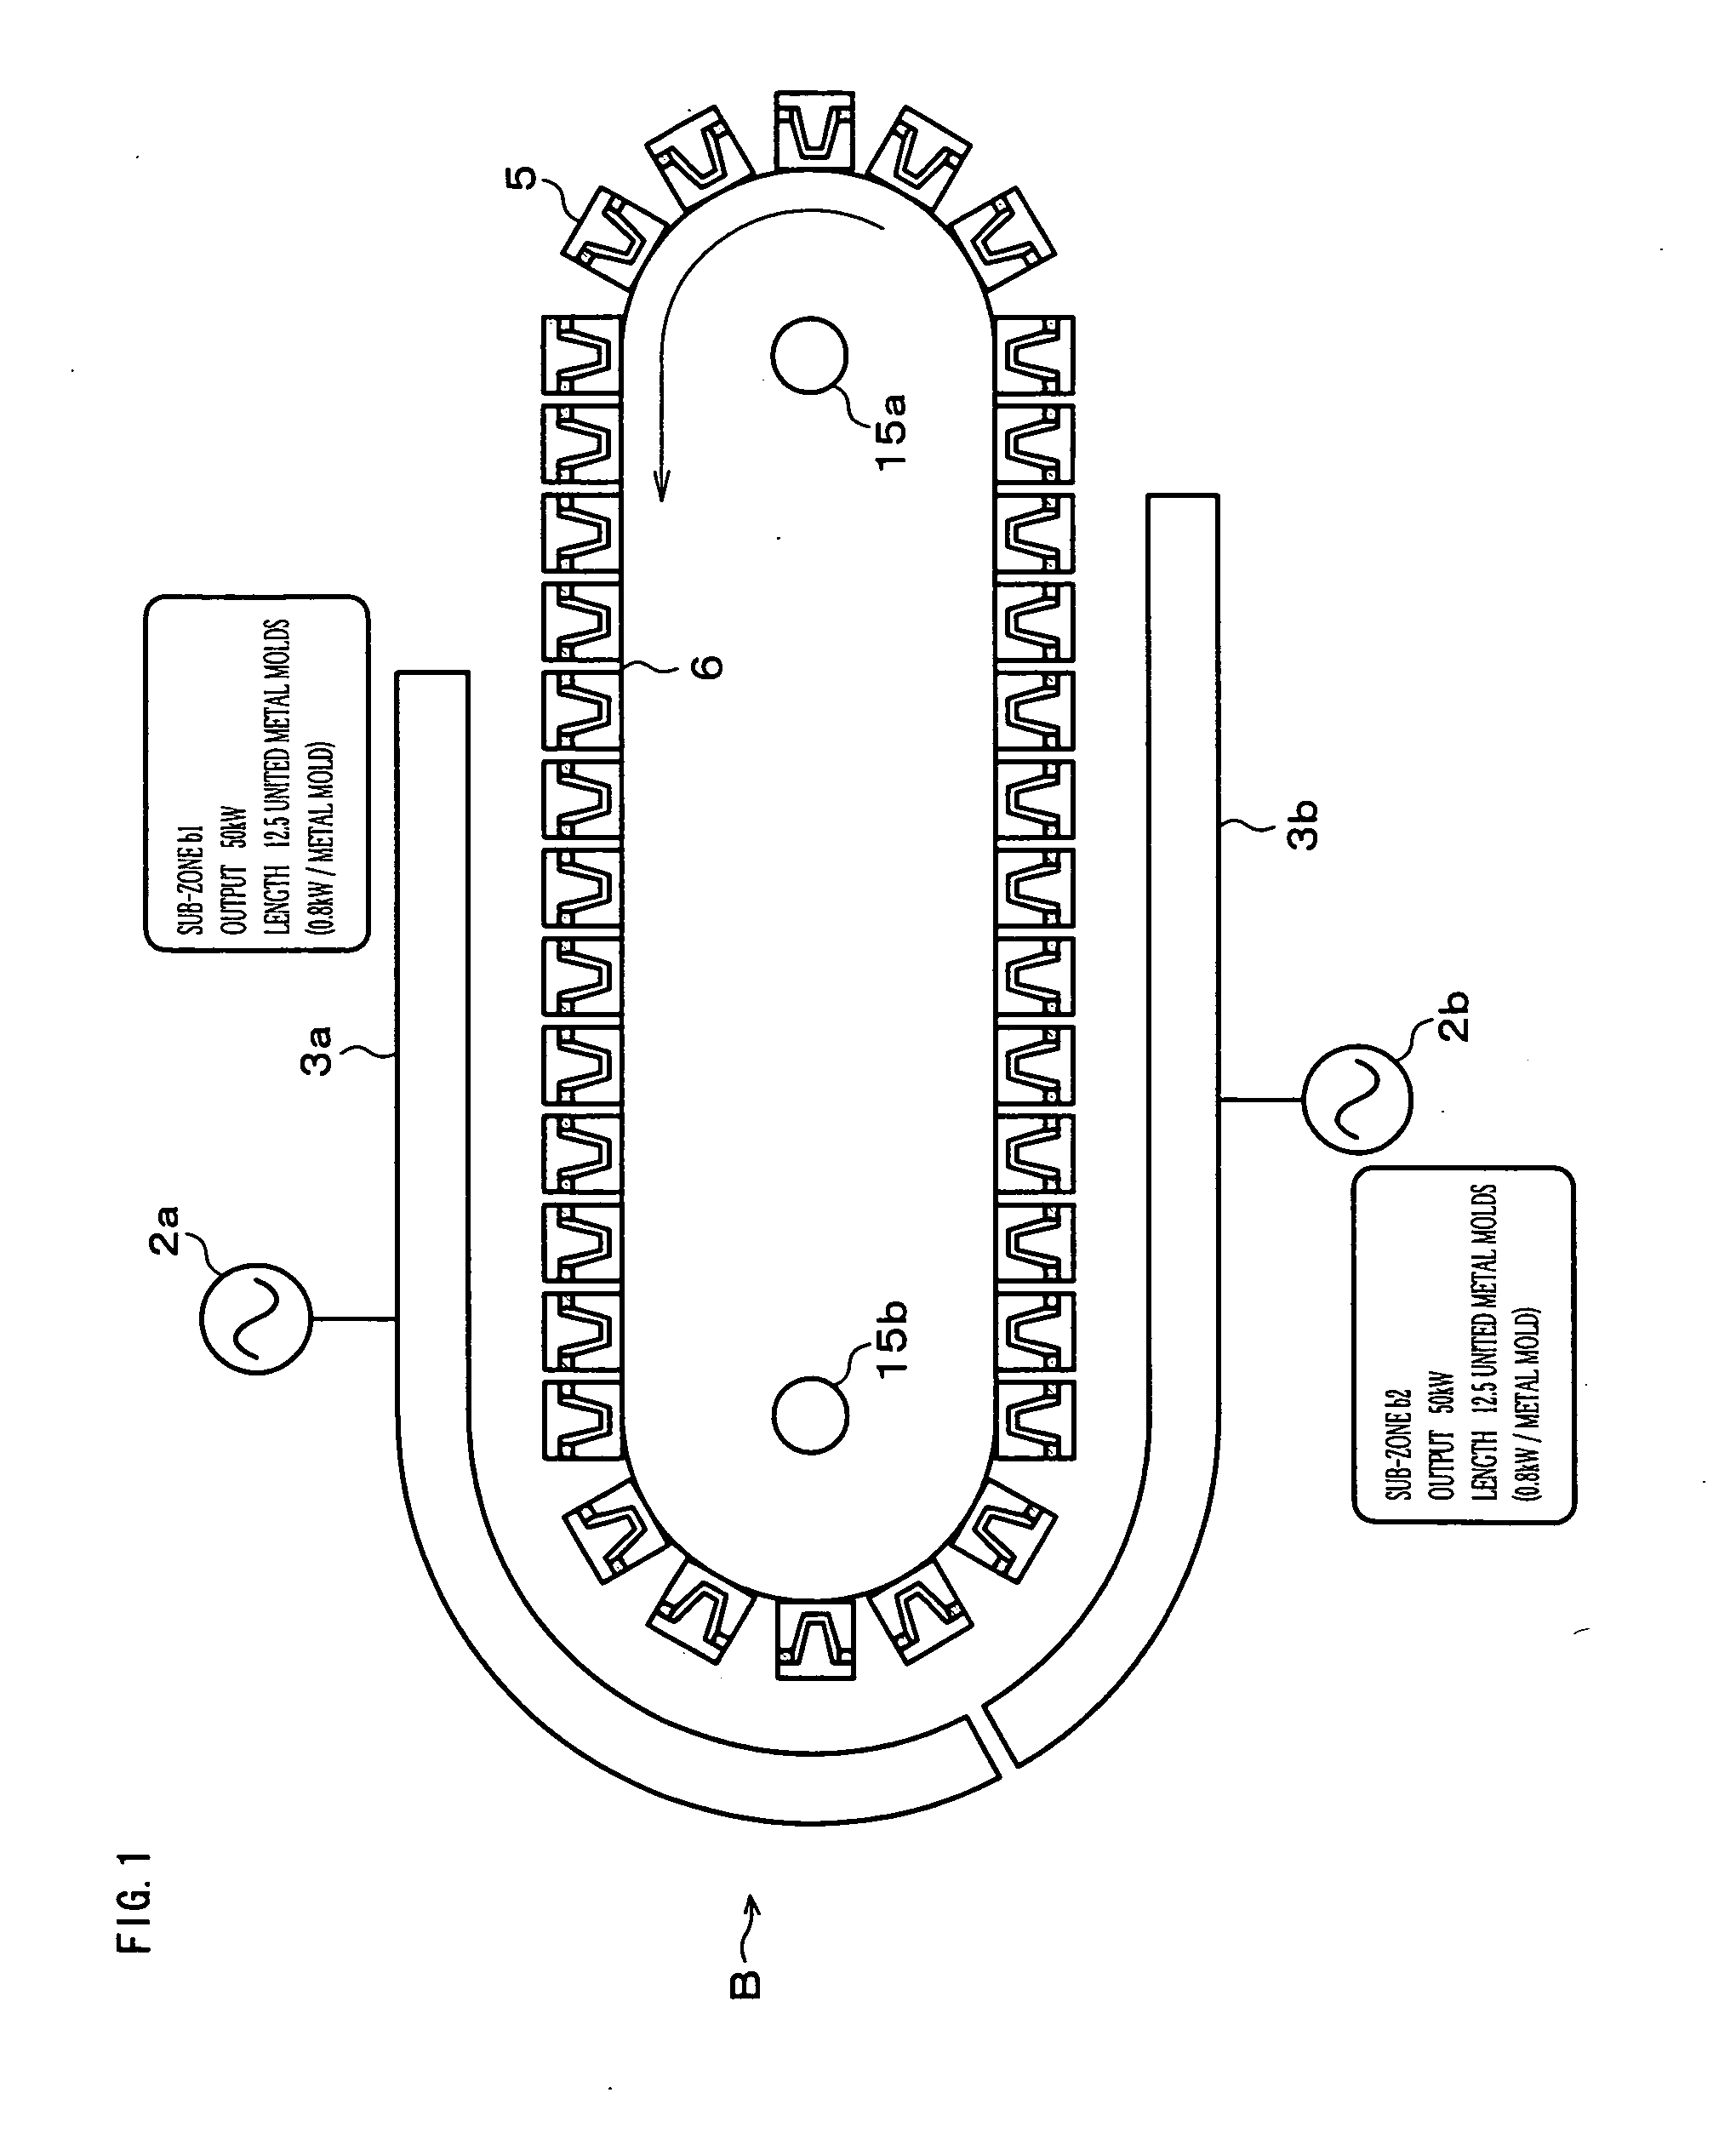 Method of manufacturing hot formed object, and device and method for continous high-frequency heating